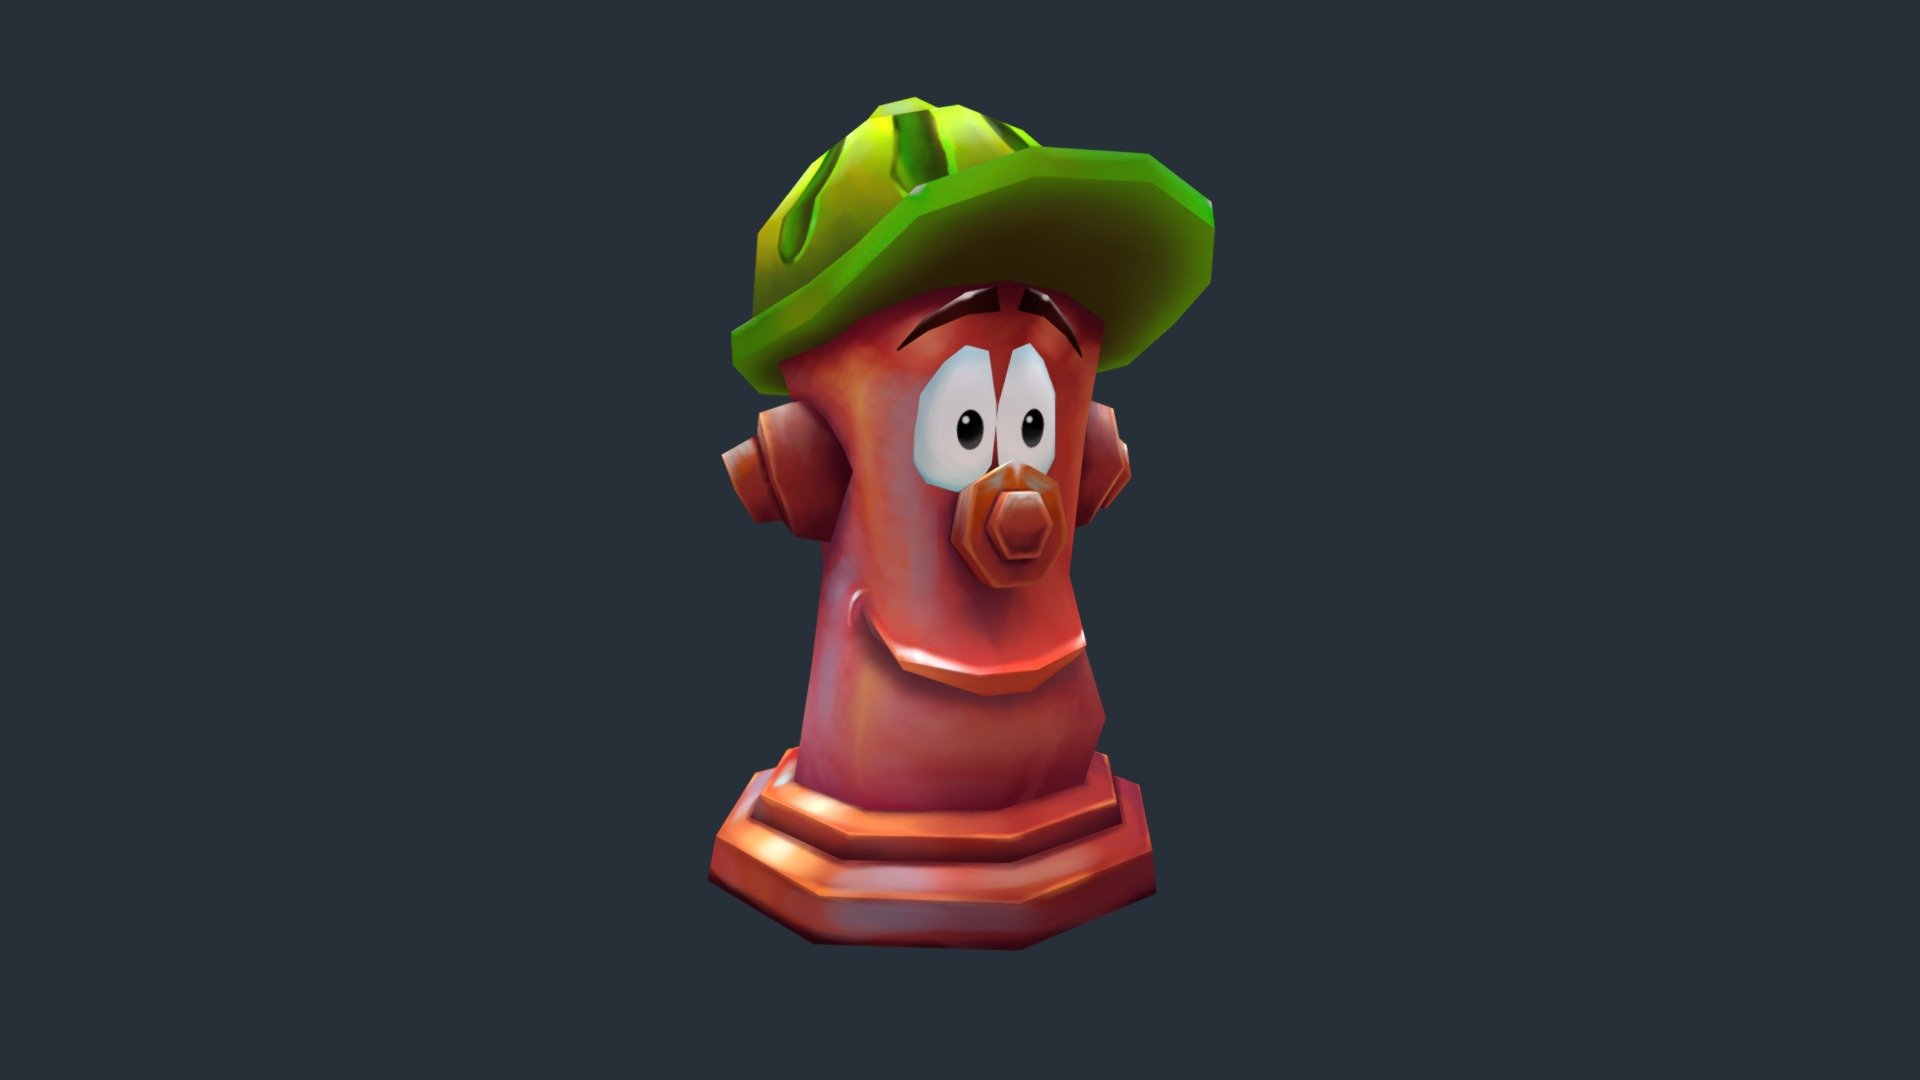 Just a very low poly Happy Hydrant 3d model